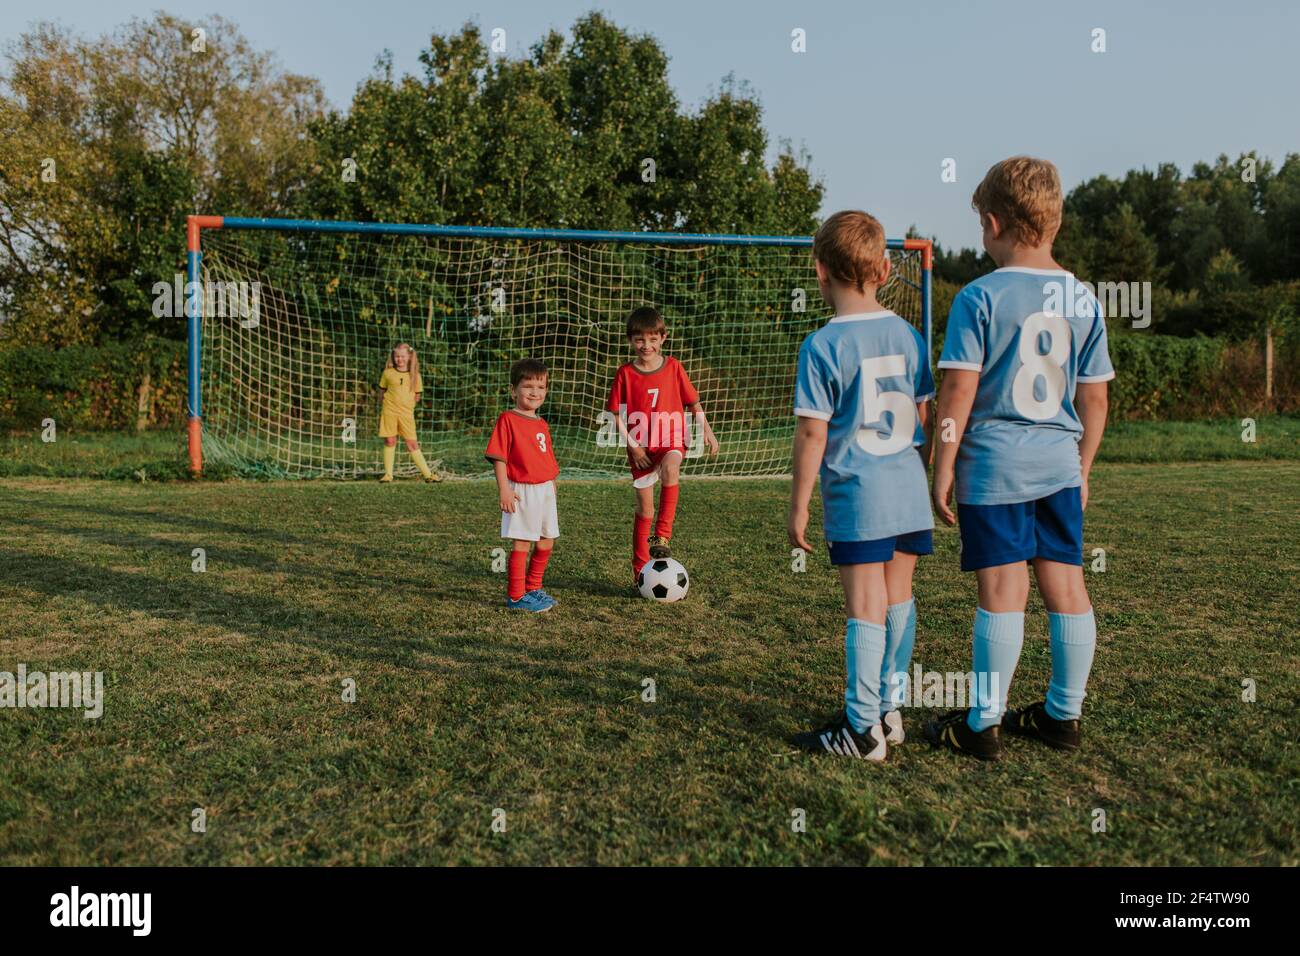 Children playing amateur football. Cheerful kids in teams wearing soccer dresses having fun playing soccer in field at sunset. Stock Photo